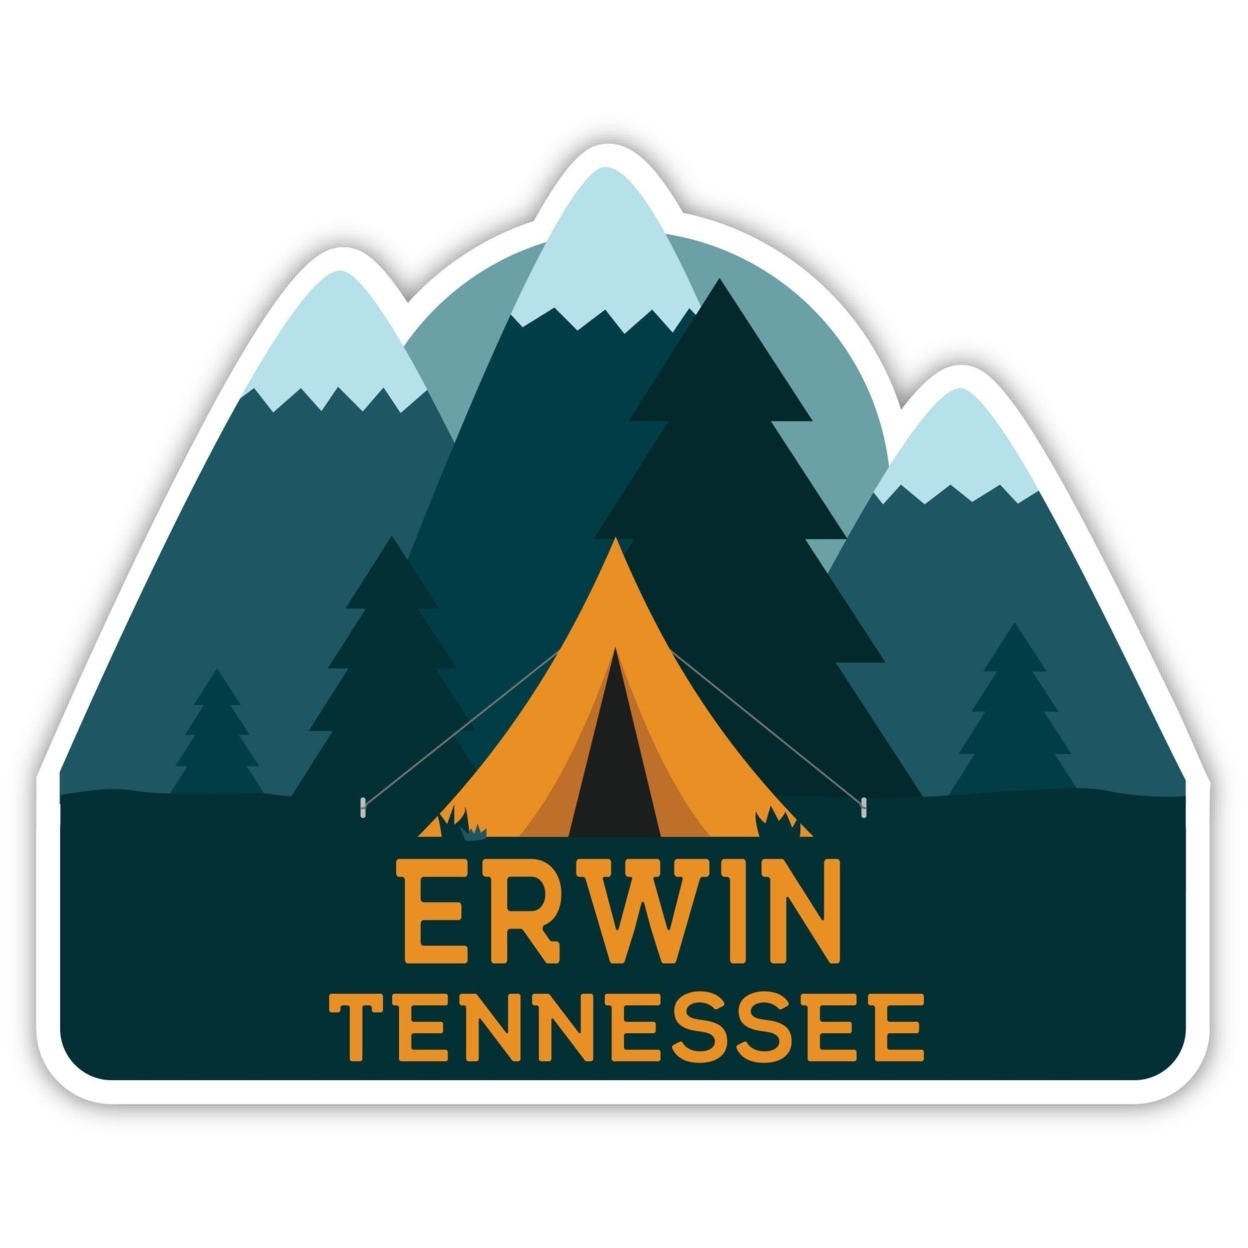 Erwin Tennessee Souvenir Decorative Stickers (Choose Theme And Size) - Single Unit, 8-Inch, Tent